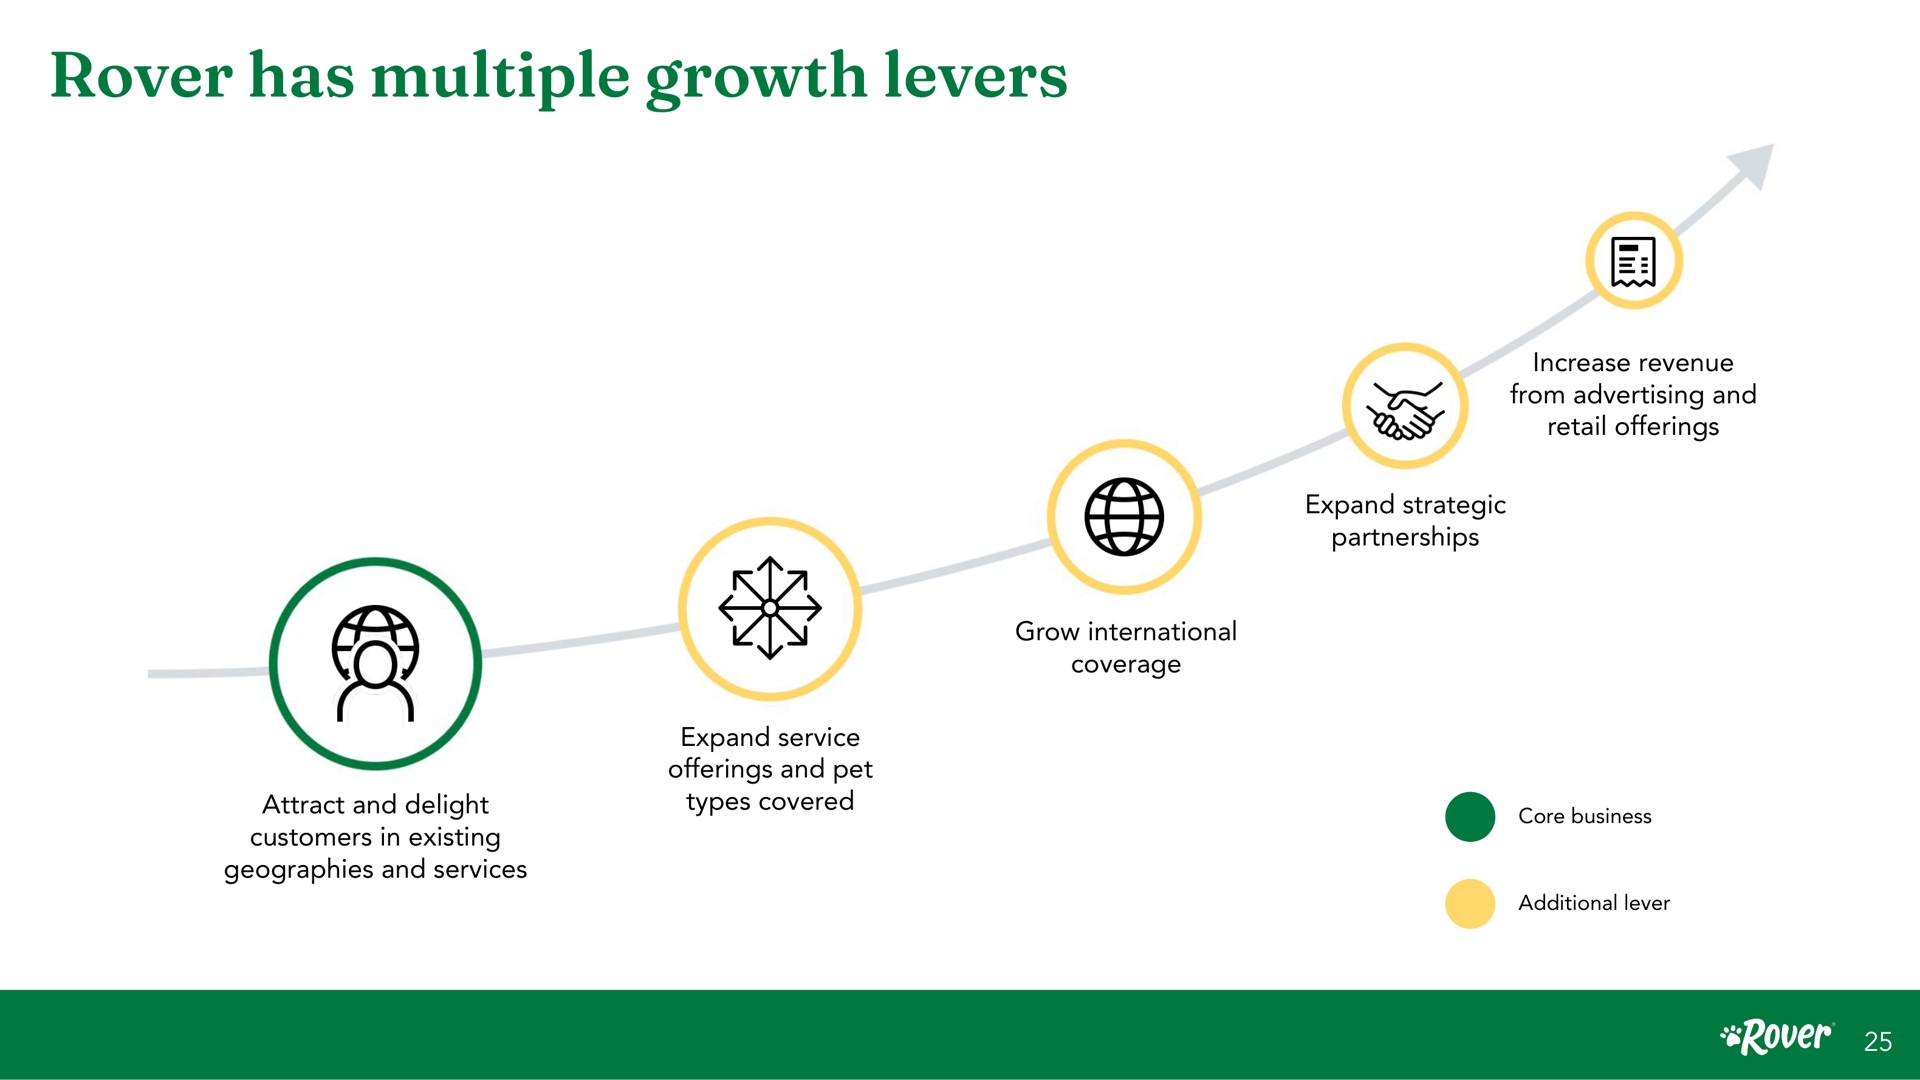 rover has multiple growth levers increase revenue from advertising and retail offerings expand strategic partnerships mae grow international coverage attract and delight customers in existing geographies and services expand service offerings and pet types covered core business additional lever | Rover